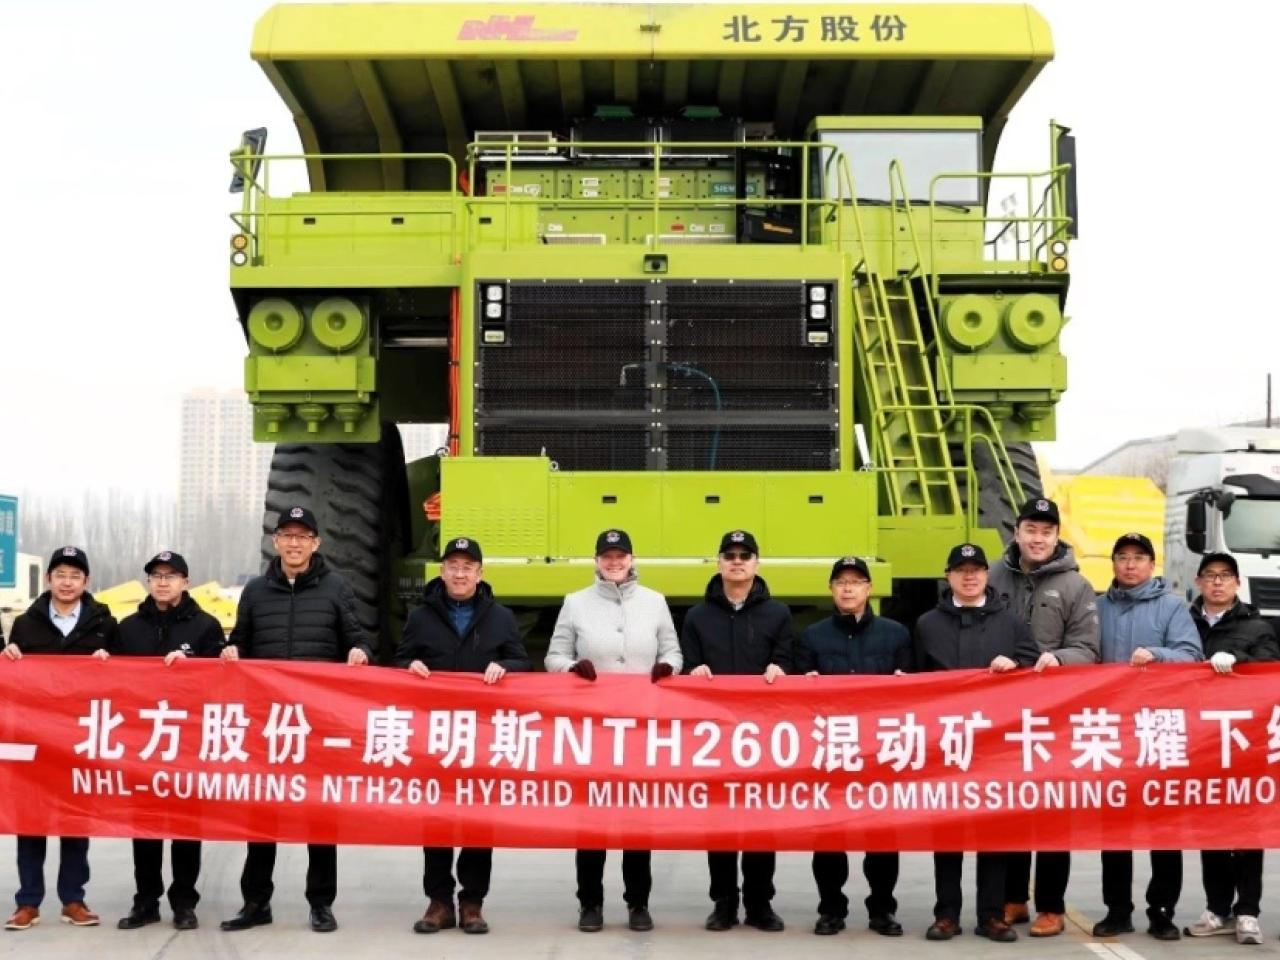 A line of people holding a line banner in front of a mining truck